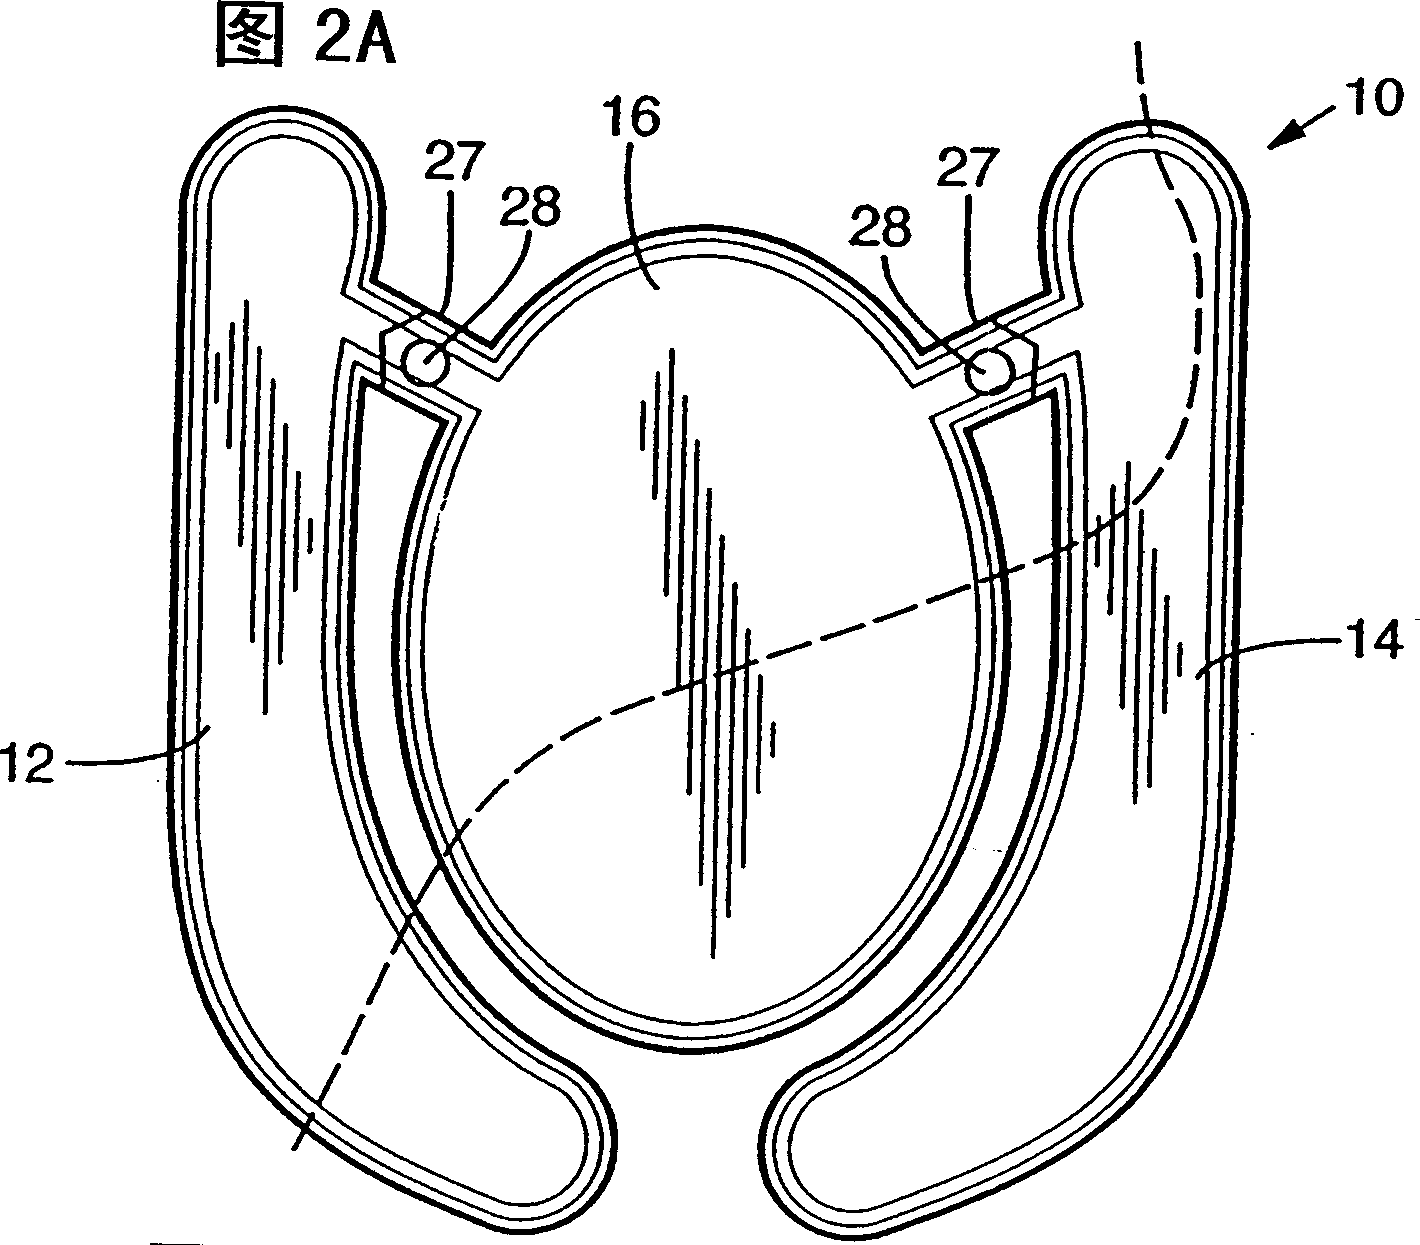 Article of footwear with motion control device